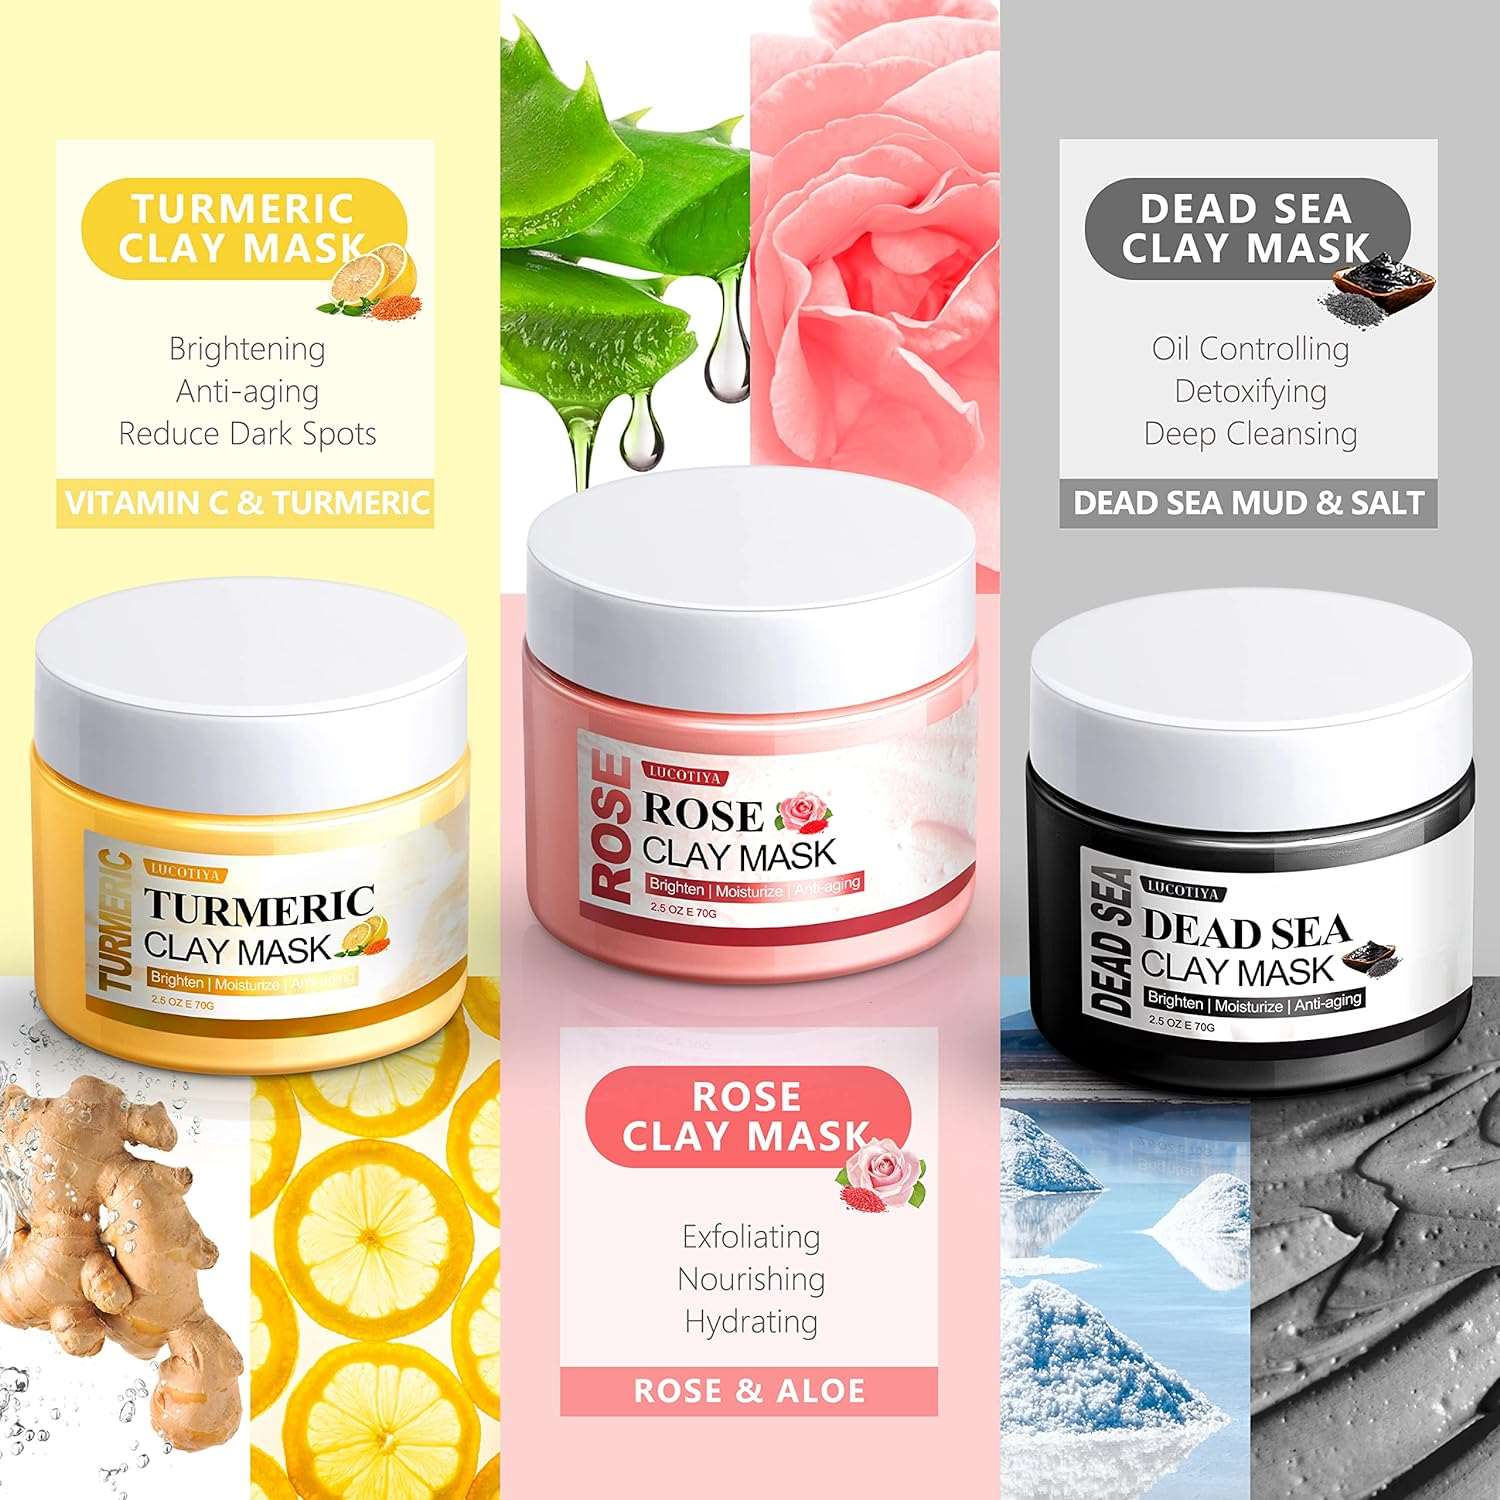 Wholesale prices with free shipping all over United States 5 Pcs Face Mask Skin Care Set for Deep Pore Cleansing Turmeric Vitamin C Clay Mask, Dead Sea Mud Mask, Rose Clay Mask for Face Masks Skincare Personal Skin Care Products Gifts Headbands for Women - Steven Deals